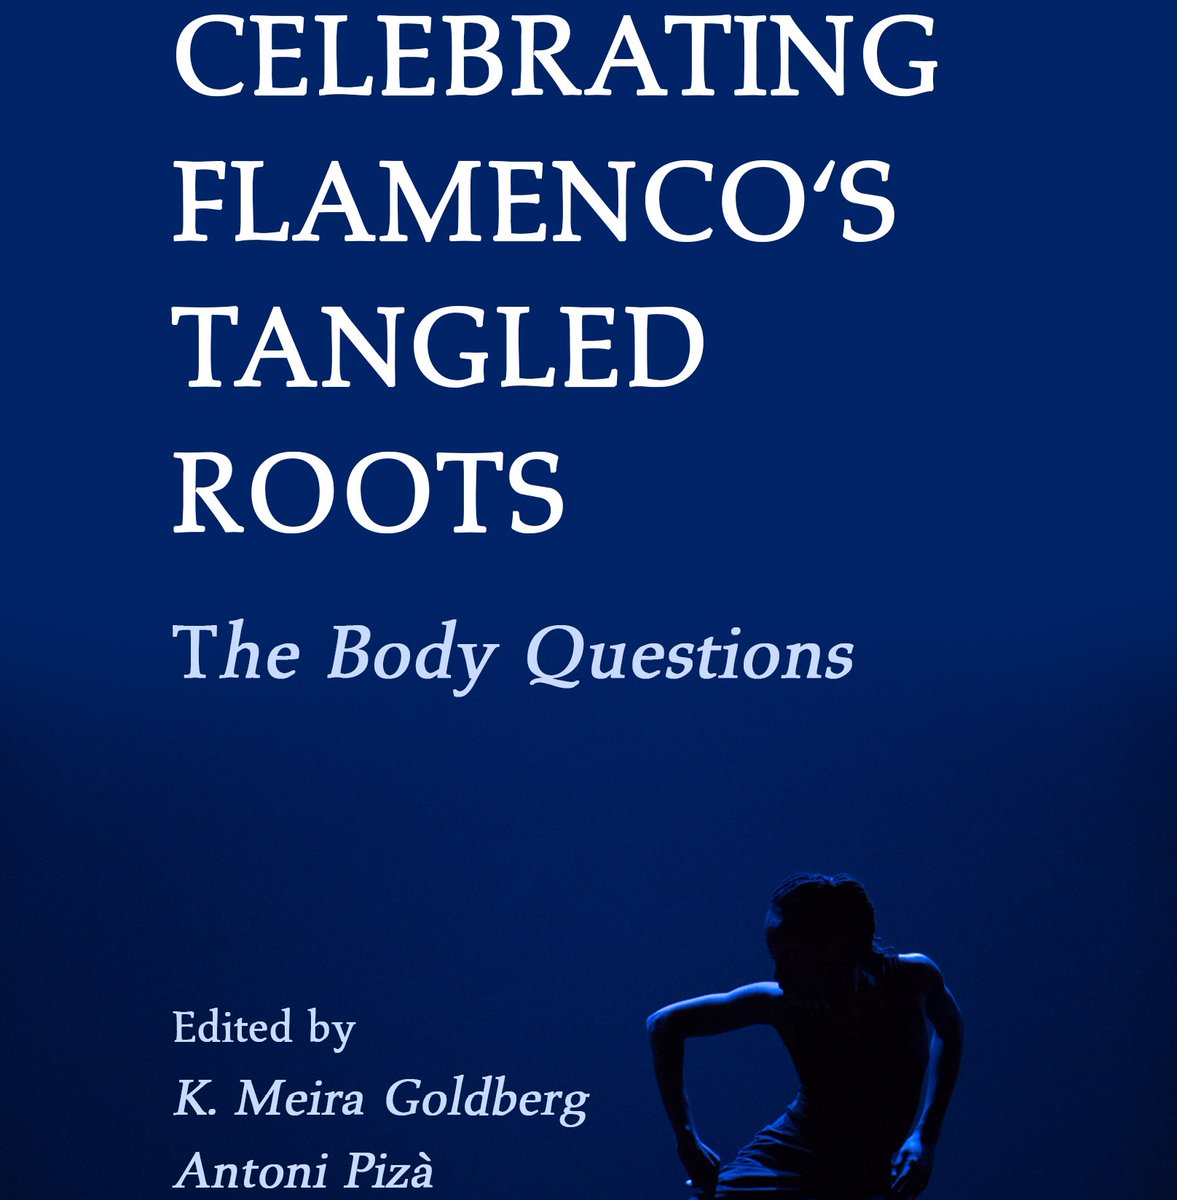 The Body Questions: The Tangled Roots of Flamenco. A series of talks at The Foundation for Iberian Music and Conventry University celebrating the seminal book edited by K. Meira Goldberg and Antoni Pizà brookcenter.gc.cuny.edu/2022/10/22/the… cambridgescholars.com/product/978-1-…